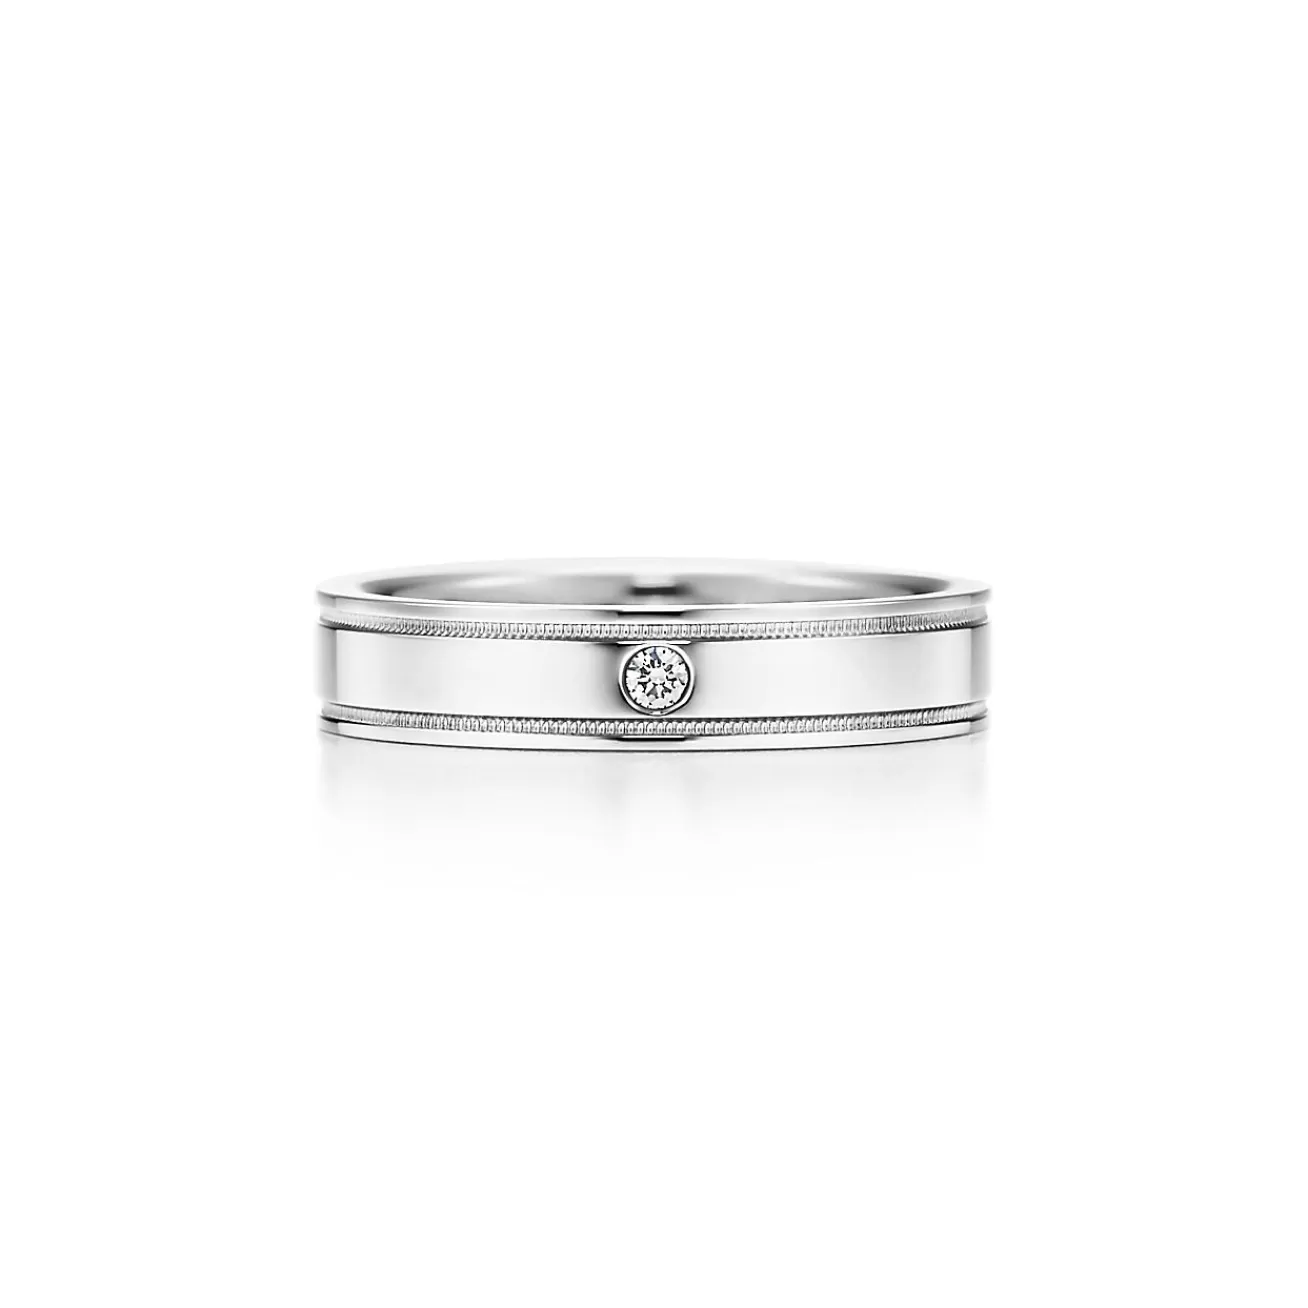 Tiffany & Co. Tiffany Together Double Milgrain Band Ring in Platinum with a Diamond, 4 mm Wide | ^Women Rings | Platinum Jewelry